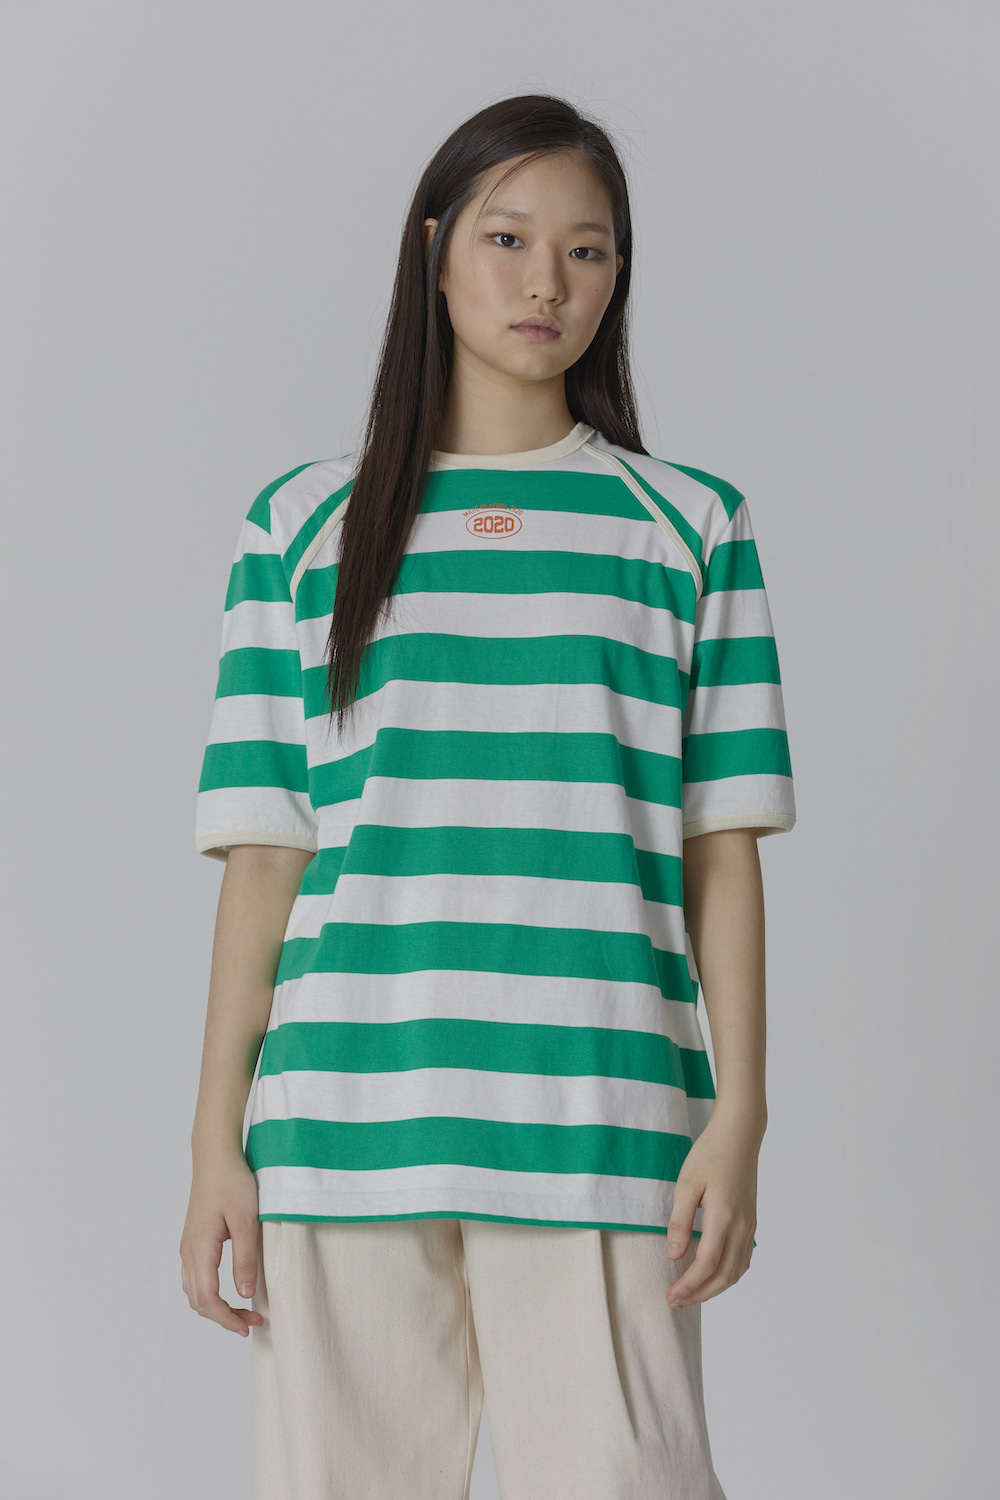 COLOR TAPING 2020 STRIPE T SHIRT GREEN